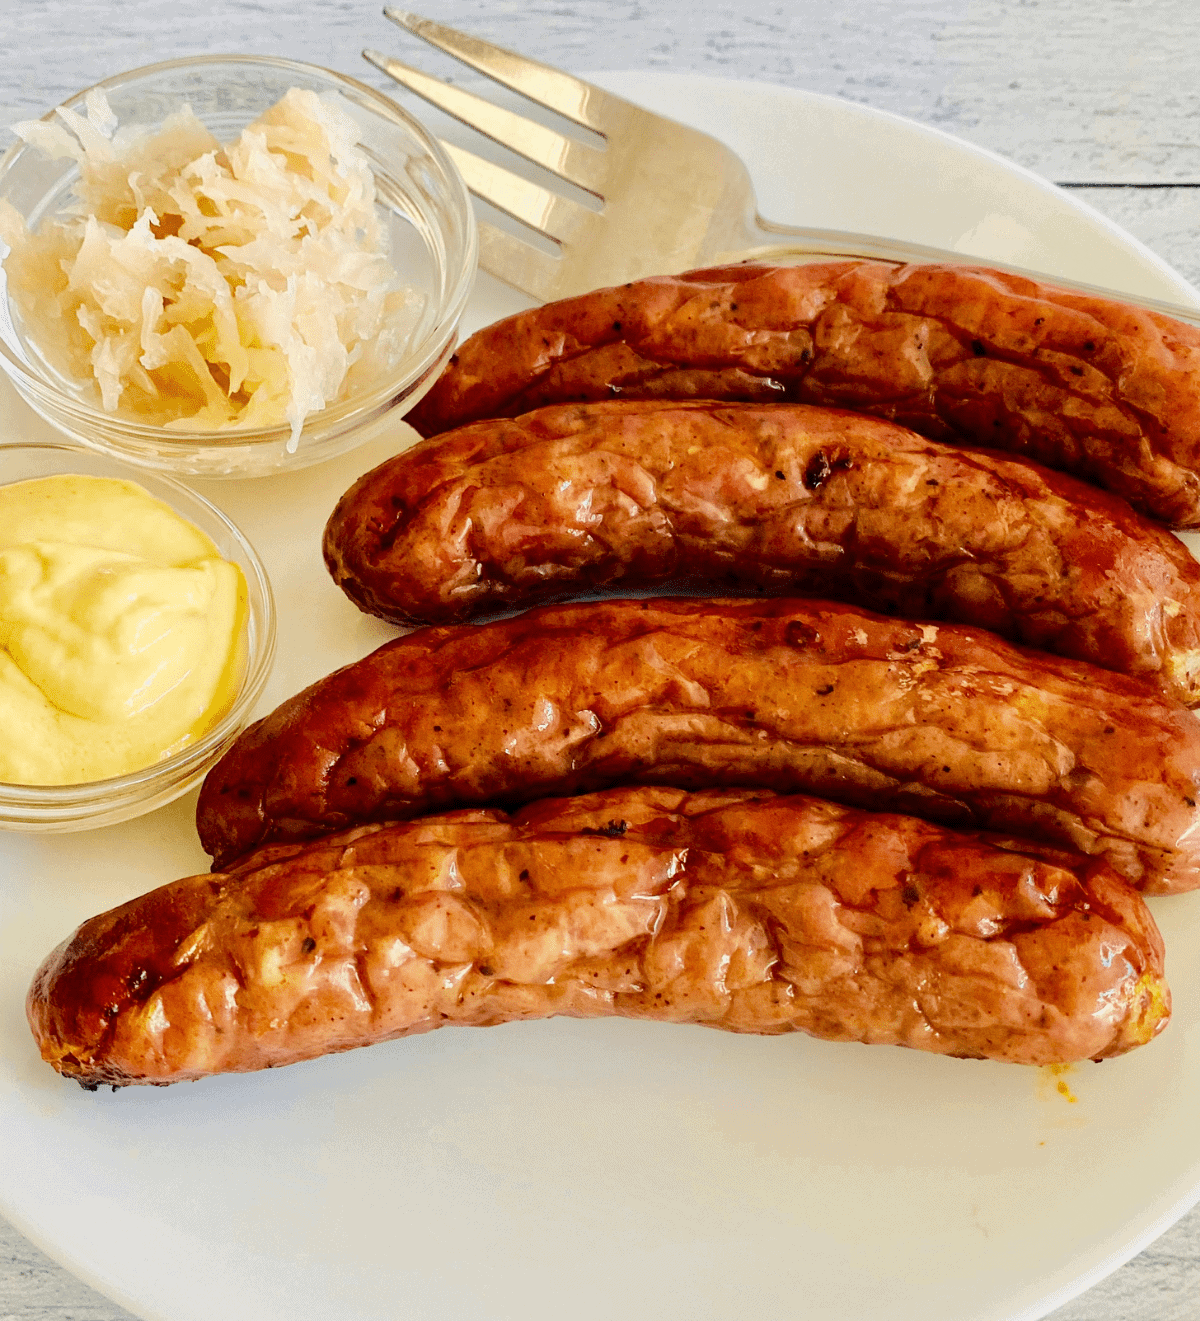 4 cooked brats on a plate next to a small bowl of dipping sauce and a small bowl of sauerkraut. 